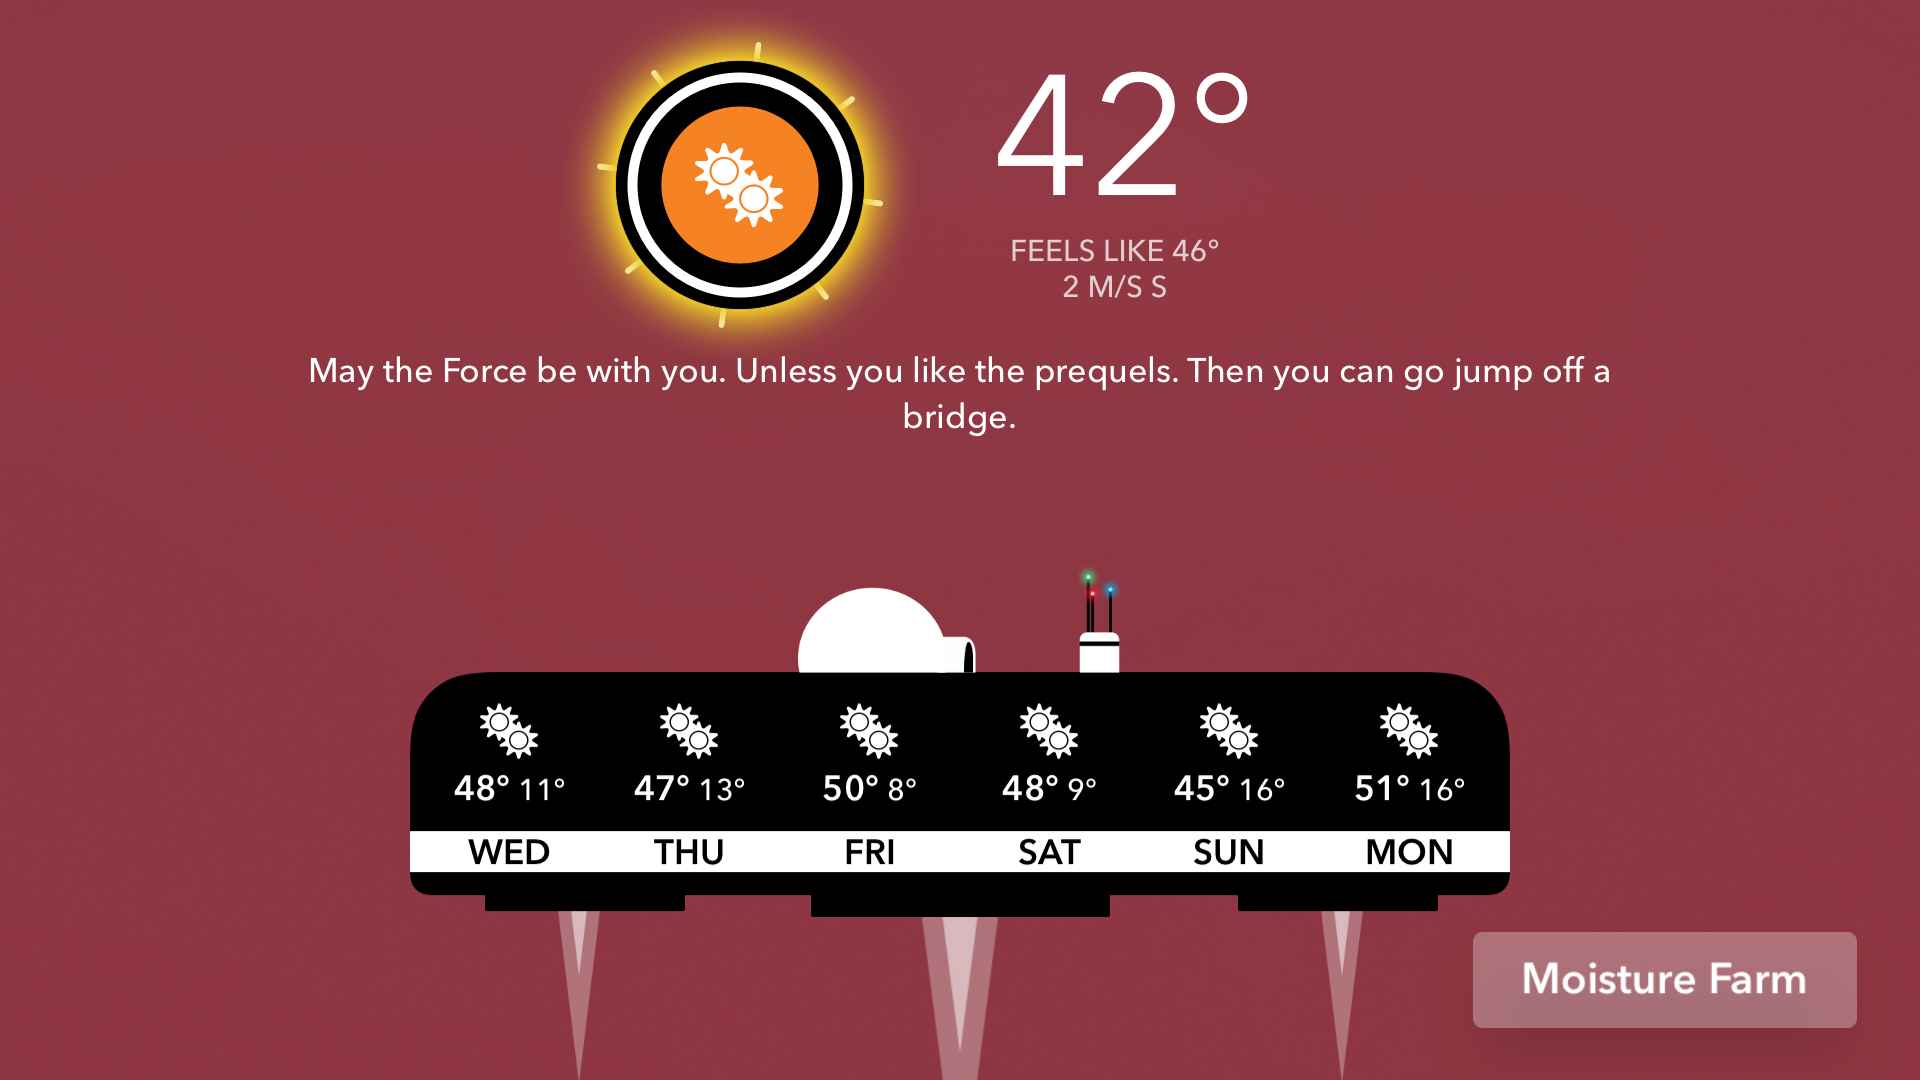 CARROT Weather (£3.99, Apple TV only)